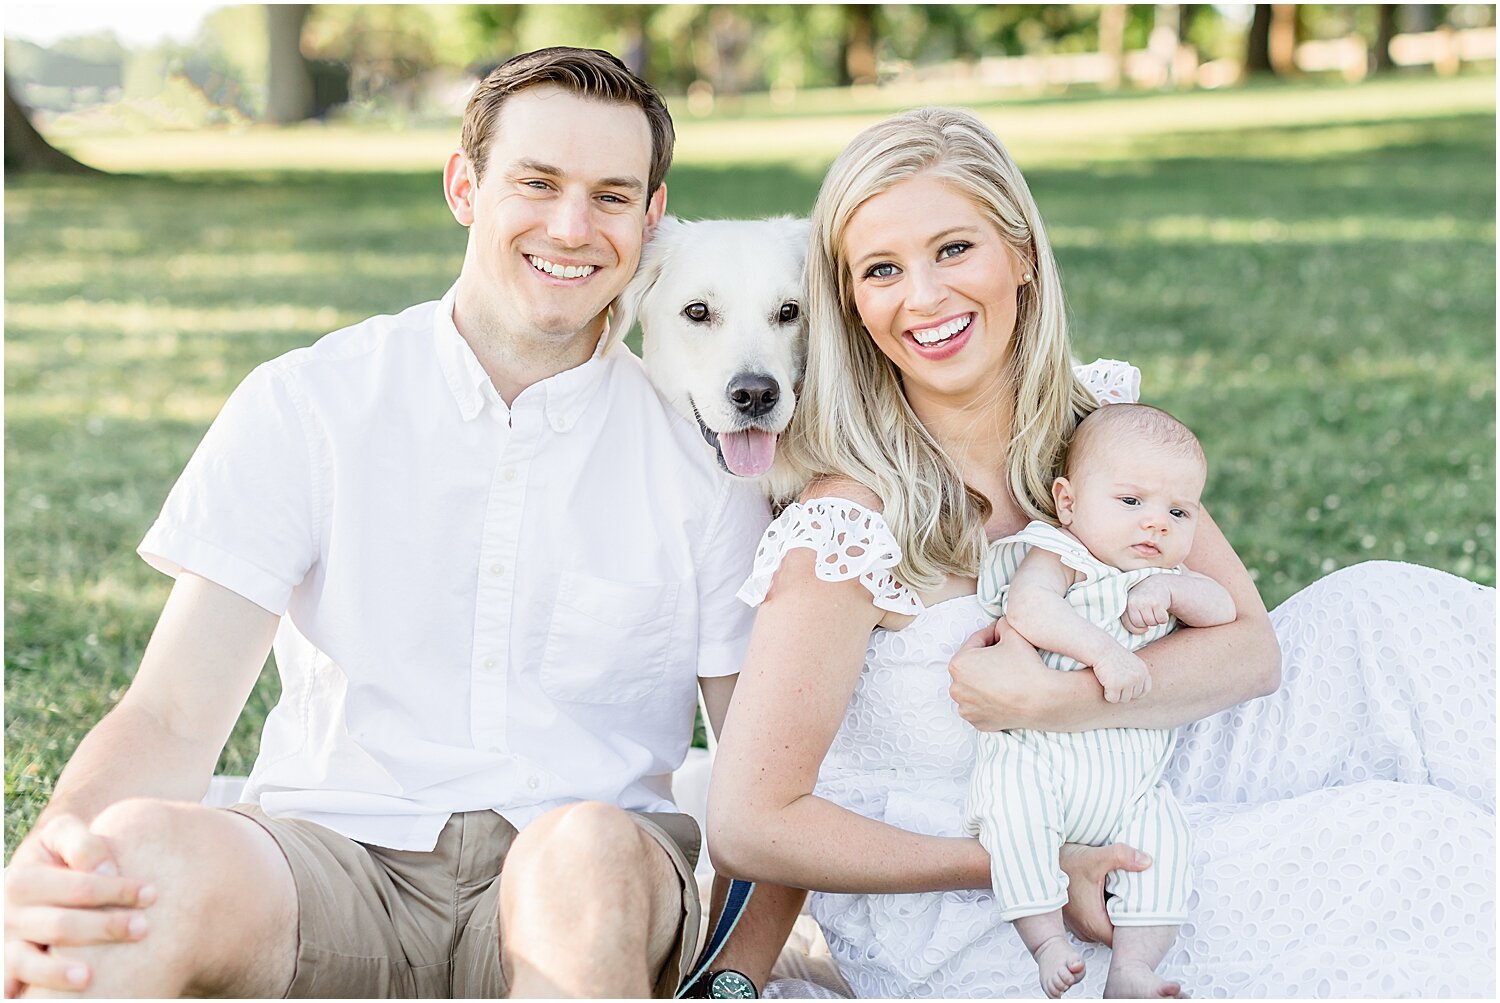 Newborn photos with dog at Waveny Park in New Canaan, CT. Photos by Kristin Wood Photography.